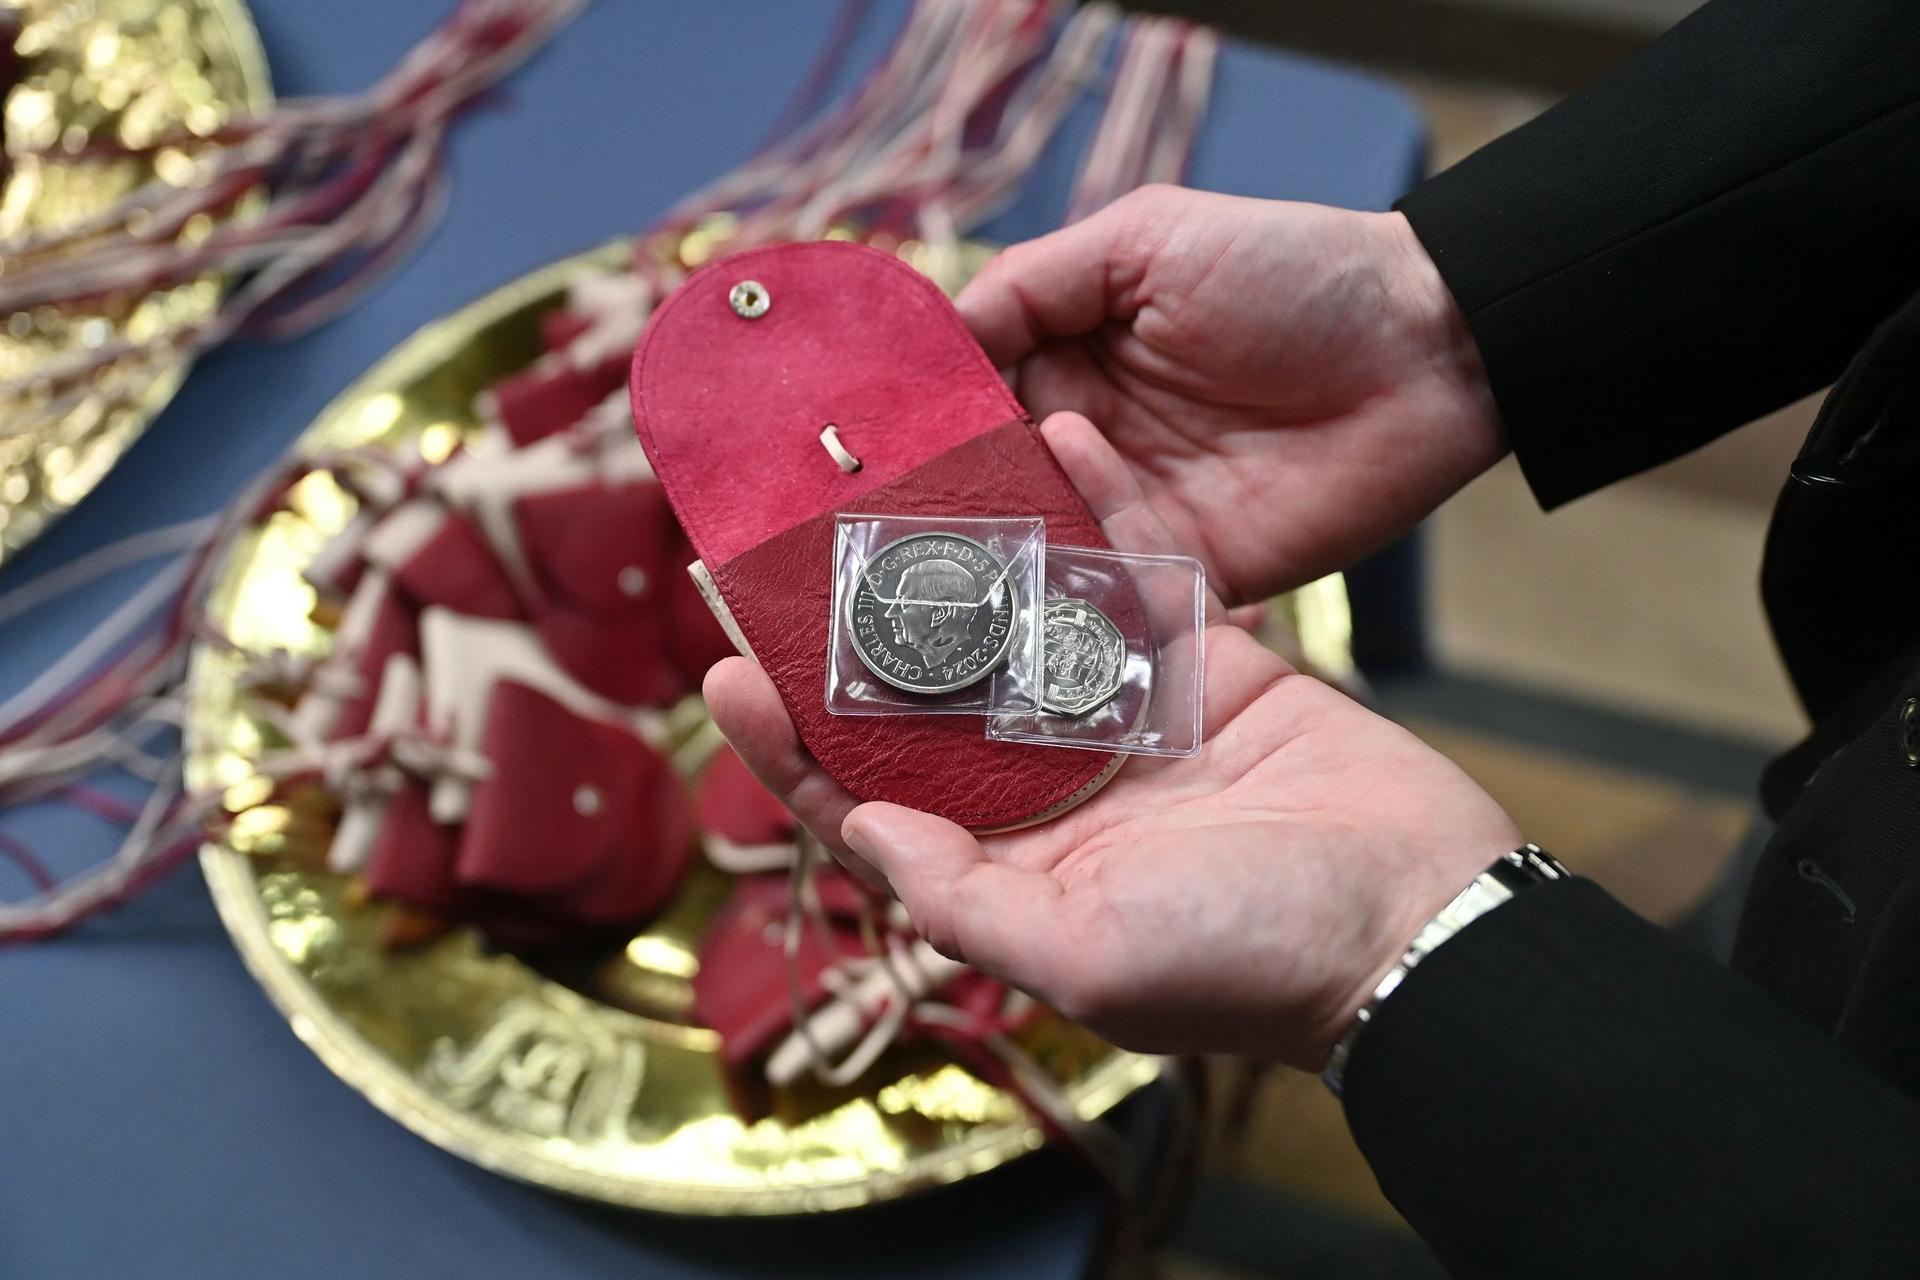 The red purses contains a £5 coin which features the image of a Tudor Dragon, and a 50p coin commemorating the RNLI as Britain's Queen Camilla distributes the Maundy Money, in Worcester Cathedral on March 28, 2024 in Worcester, England.